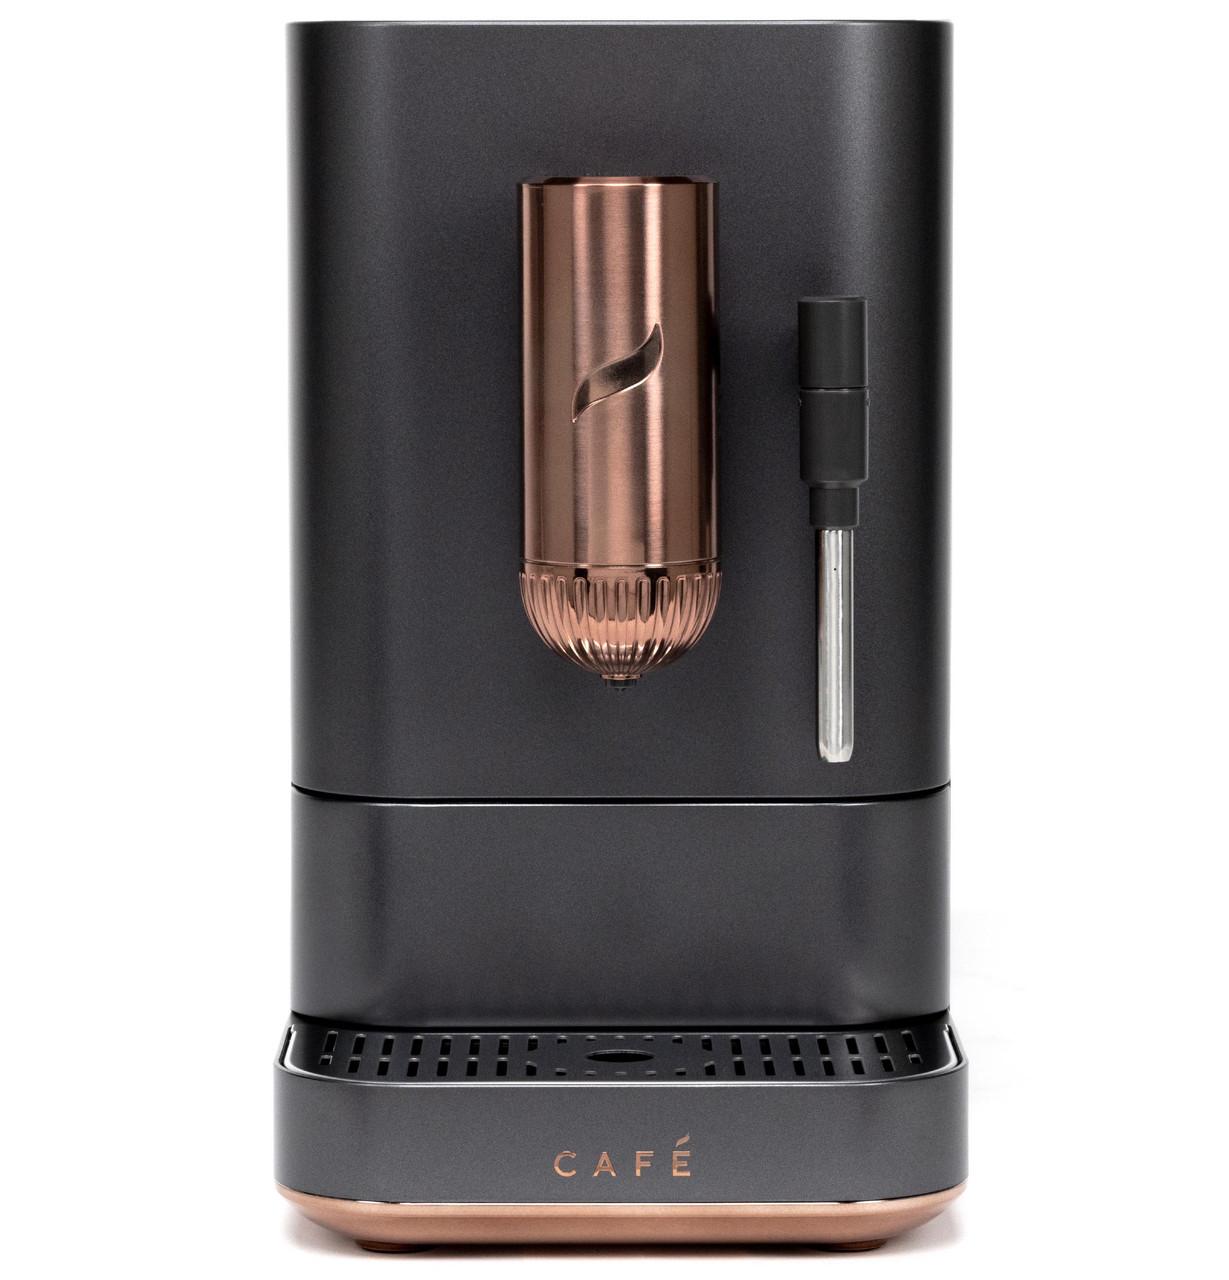 CVA7775CLEANTOUCHSTEEL, Miele, CVA 7775 - Built-in coffee machine with  DirectWater Perfectly combinable design with CoffeeSelect + AutoDescale for  highest demands.